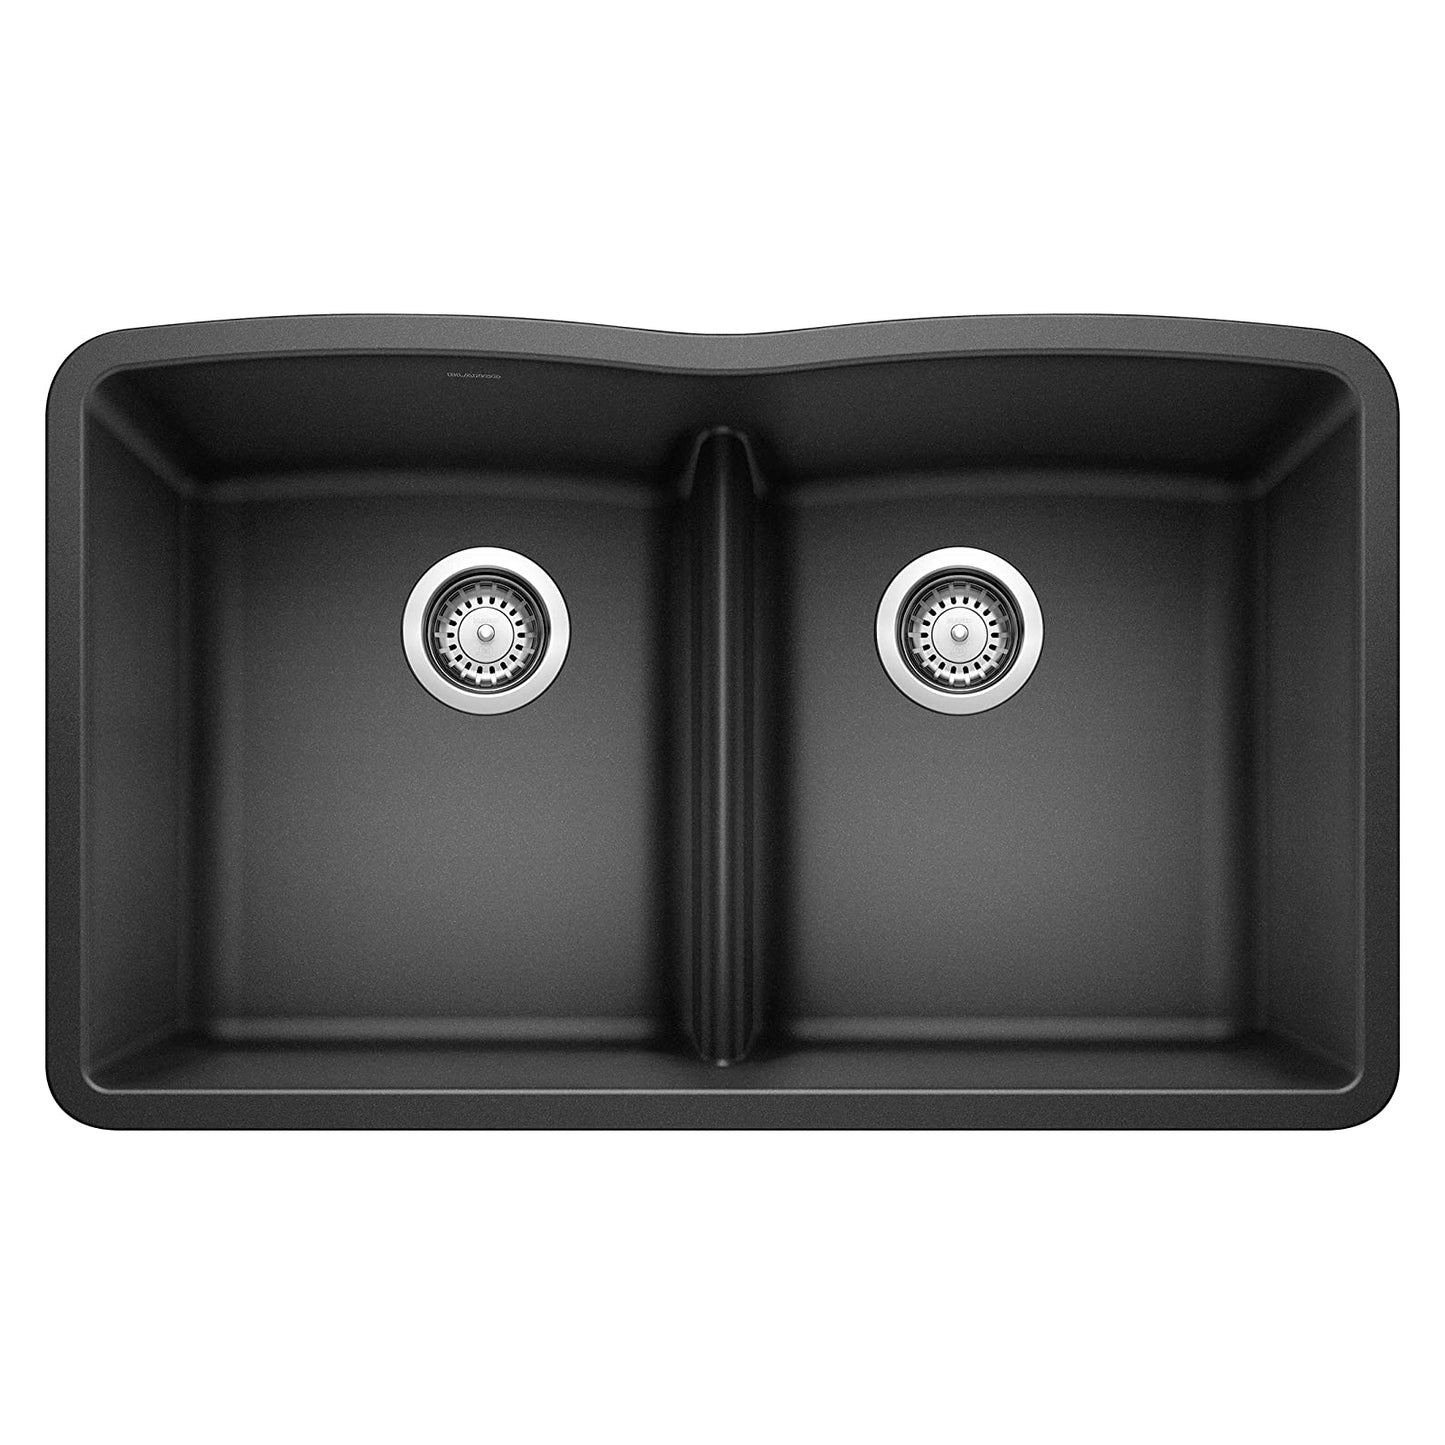 Diamond Double Bowl Undermount Kitchen Sink with Low Divide - Anthracite